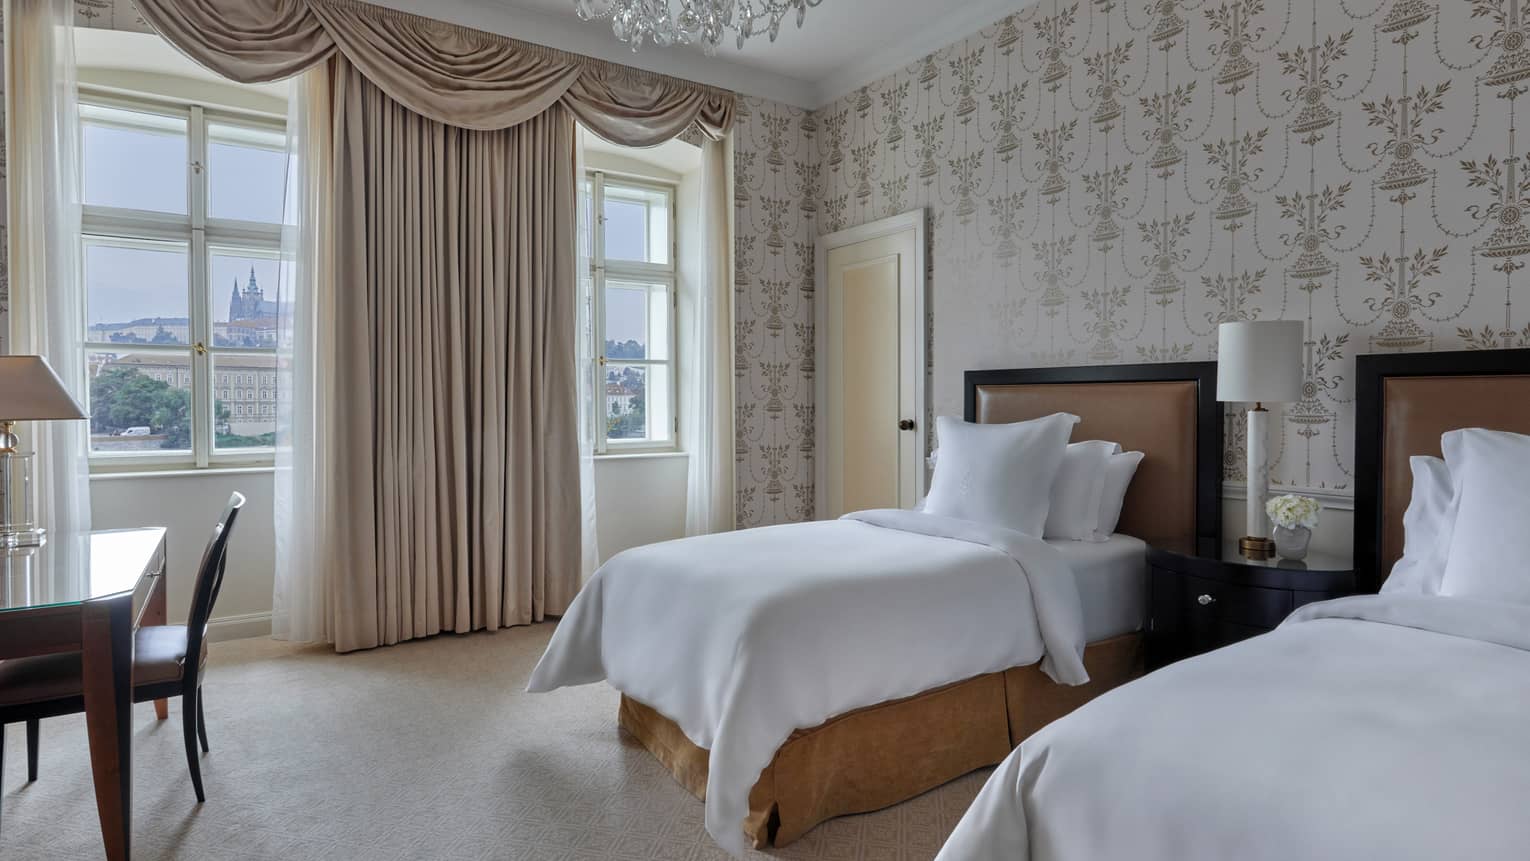 Hotel guest room with two twin beds, wall paper, elegant curtains